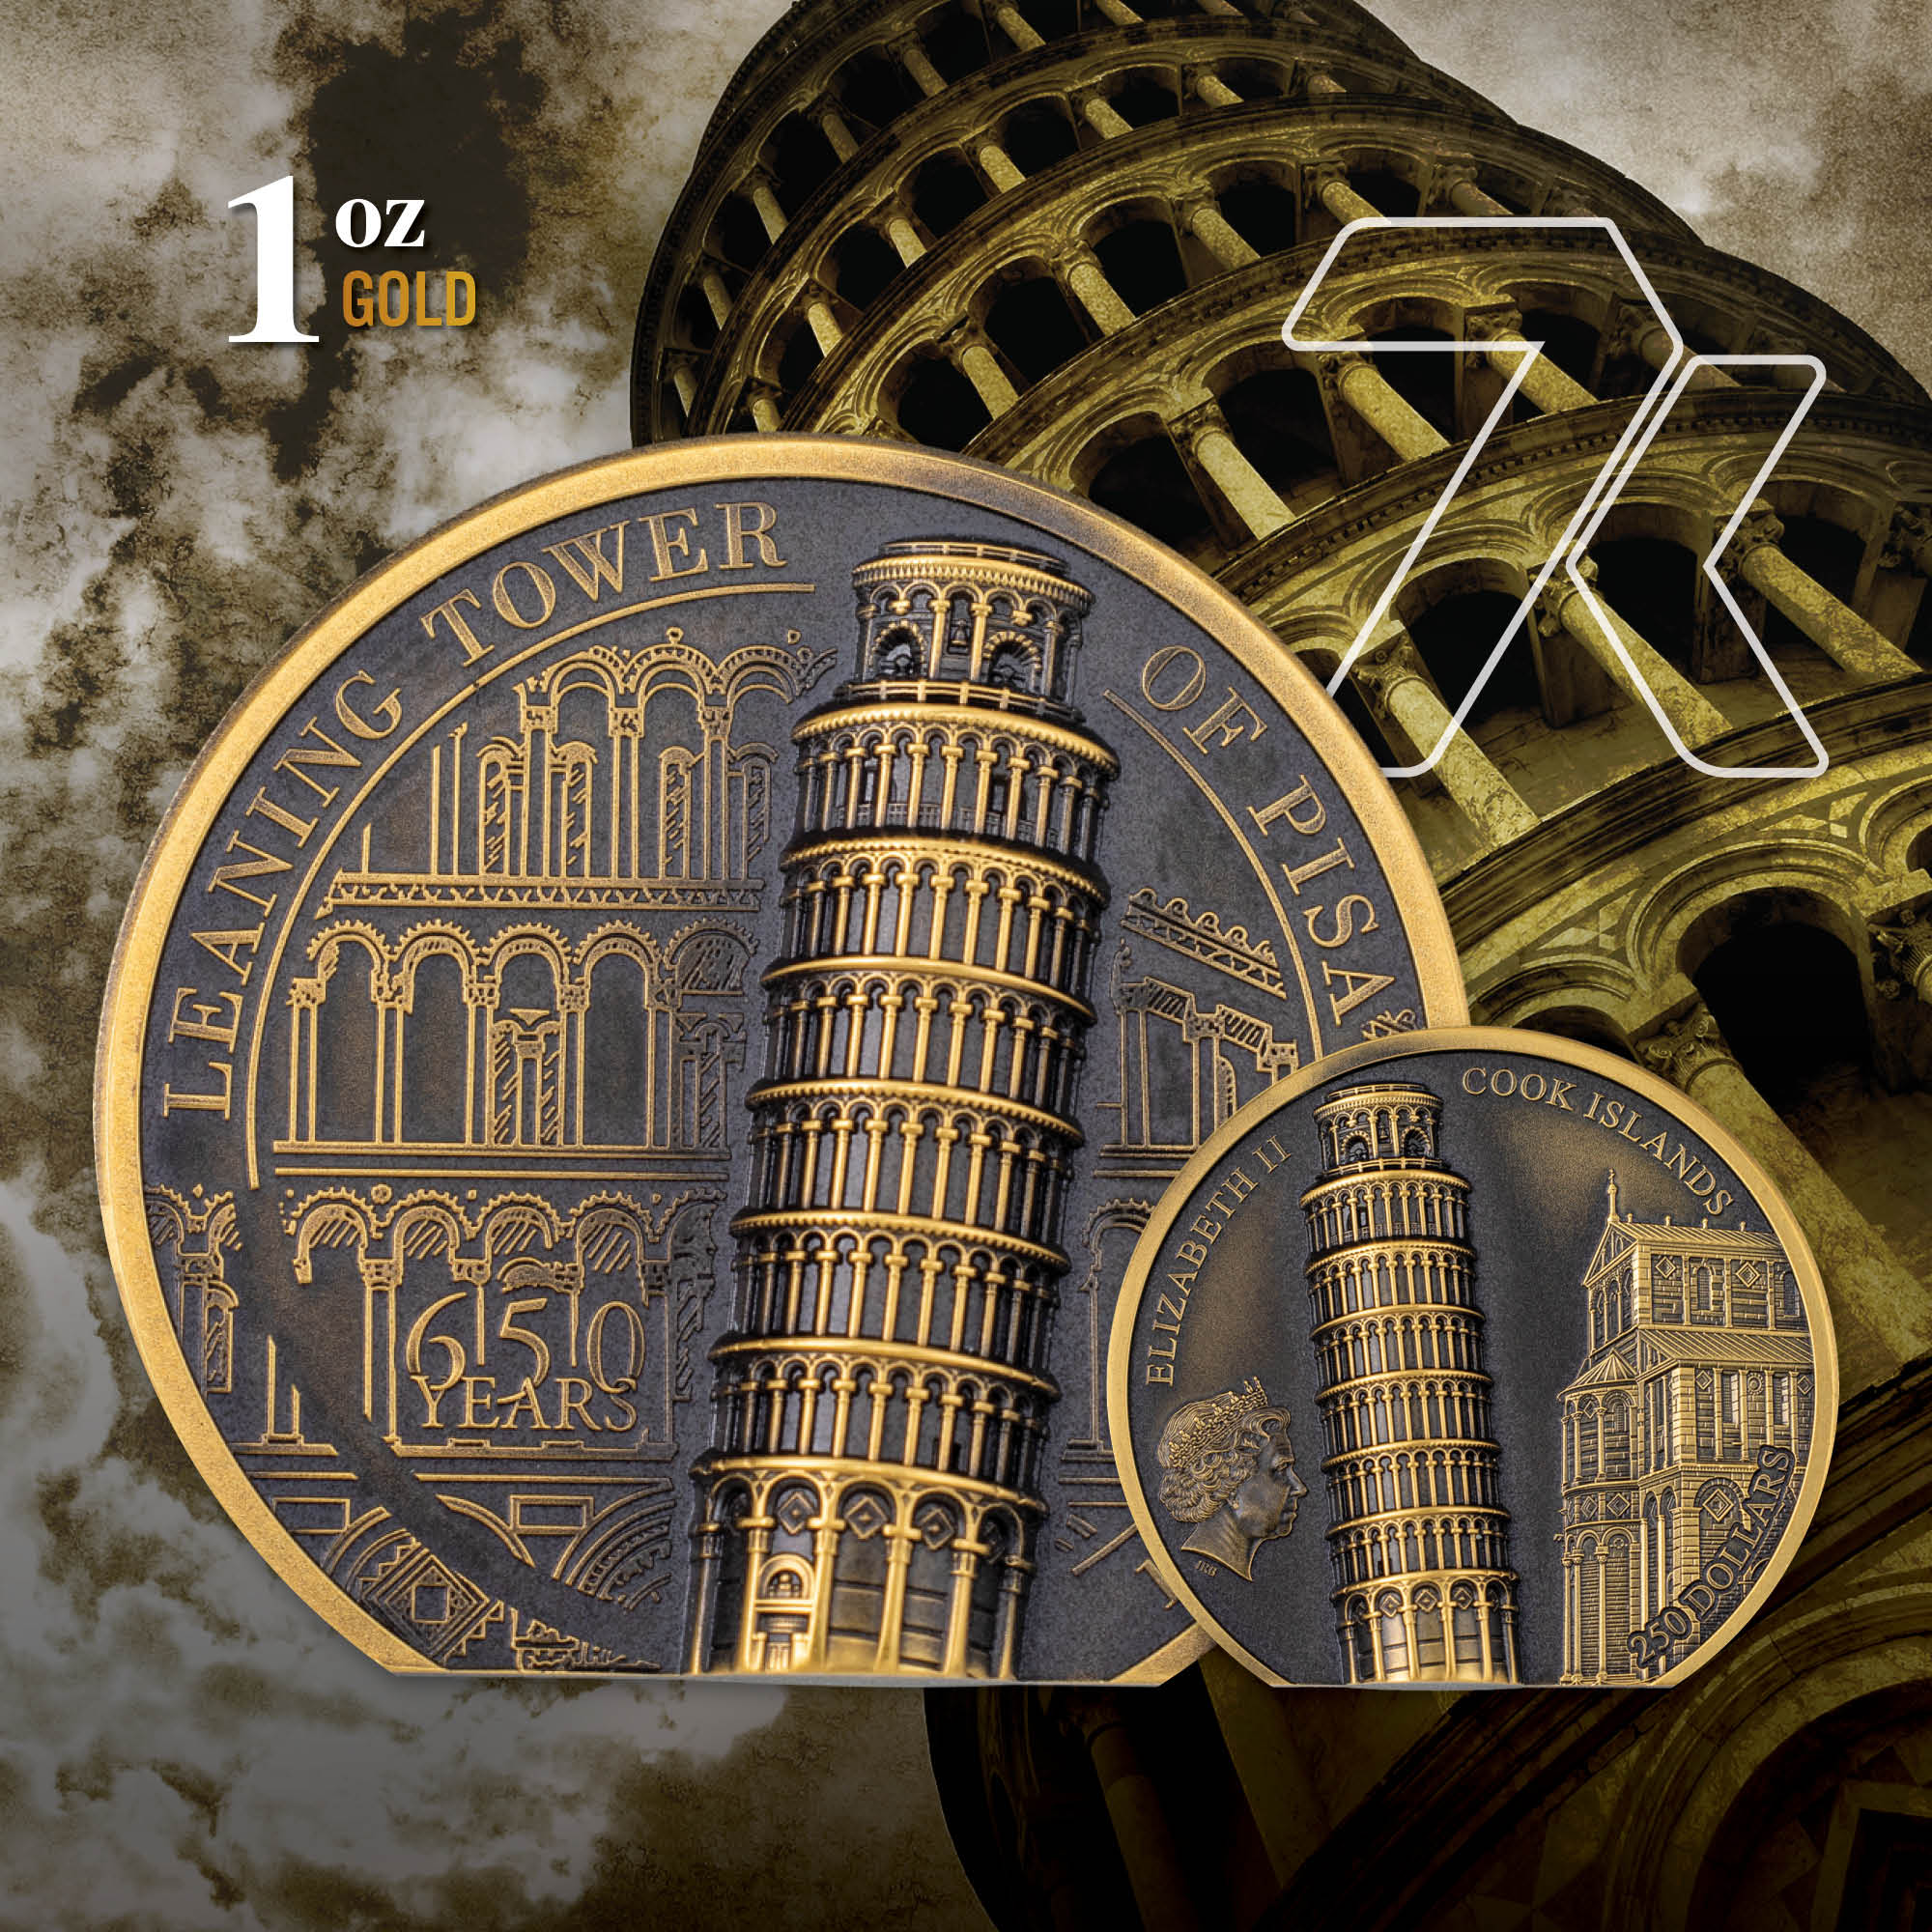 2022 Leaning Tower Of Pisa 1 oz Gold Coin